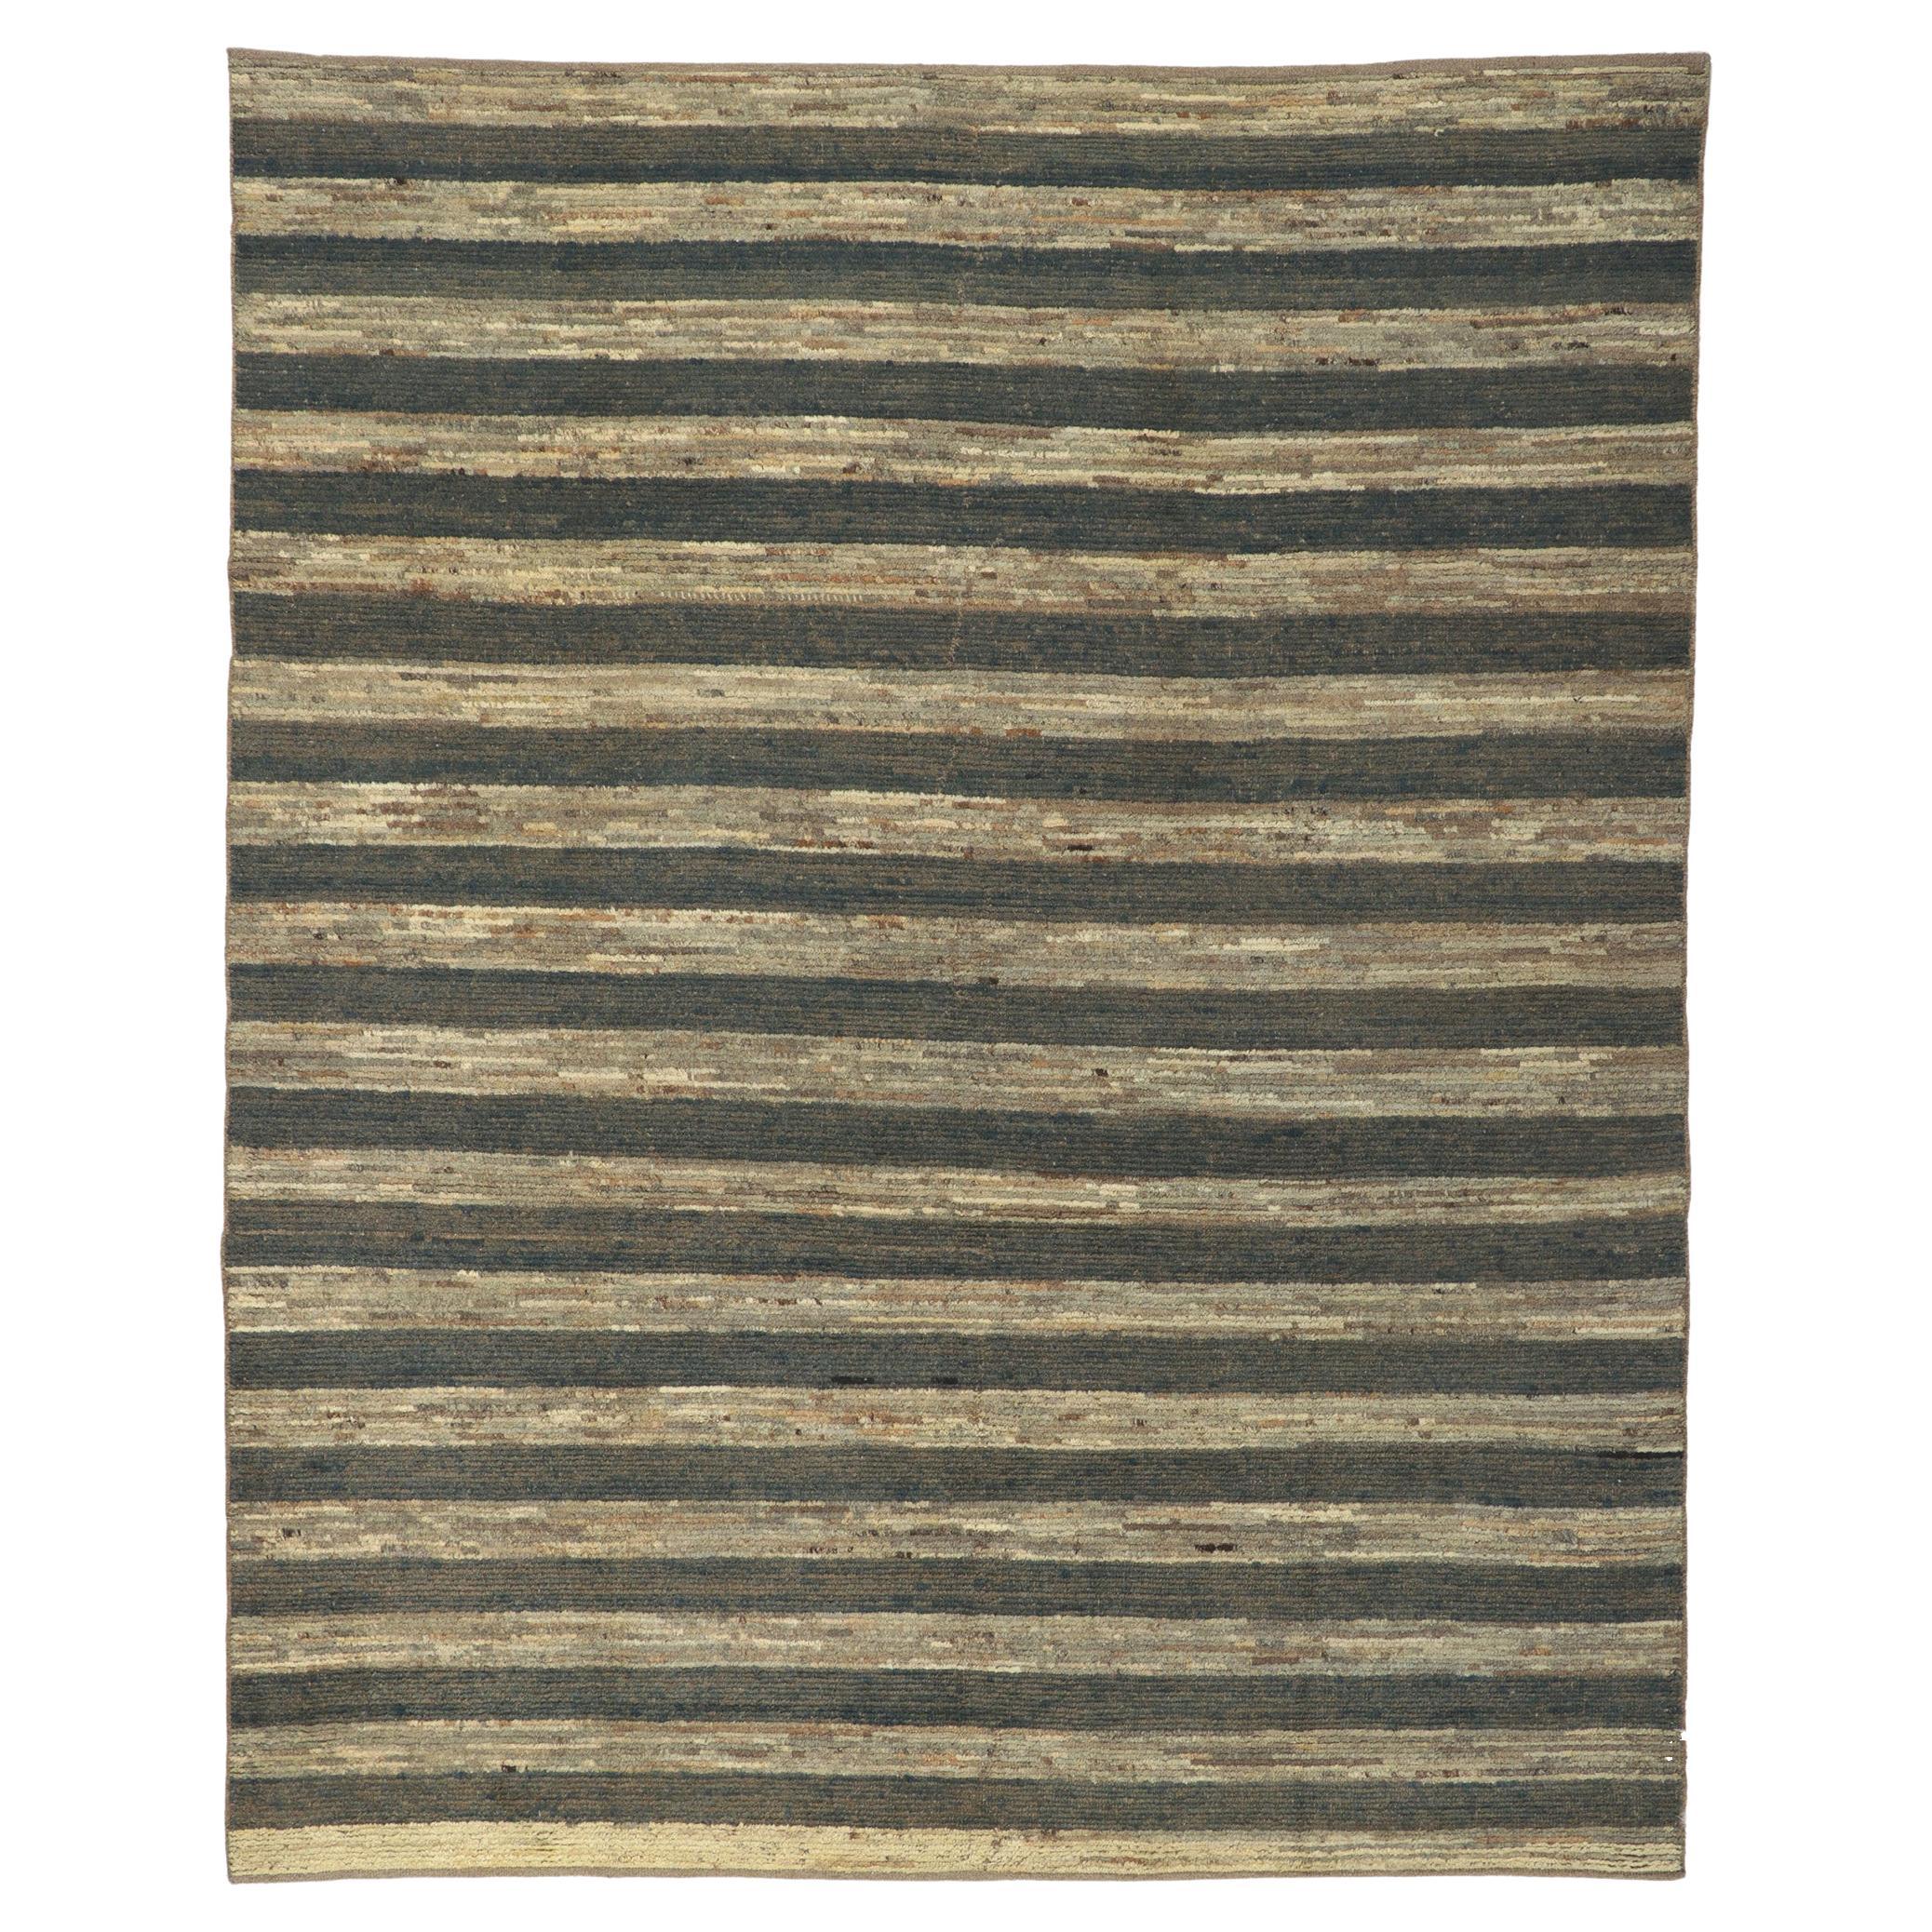 New Contemporary Moroccan Rug with Warm Earth-Tone Colors For Sale